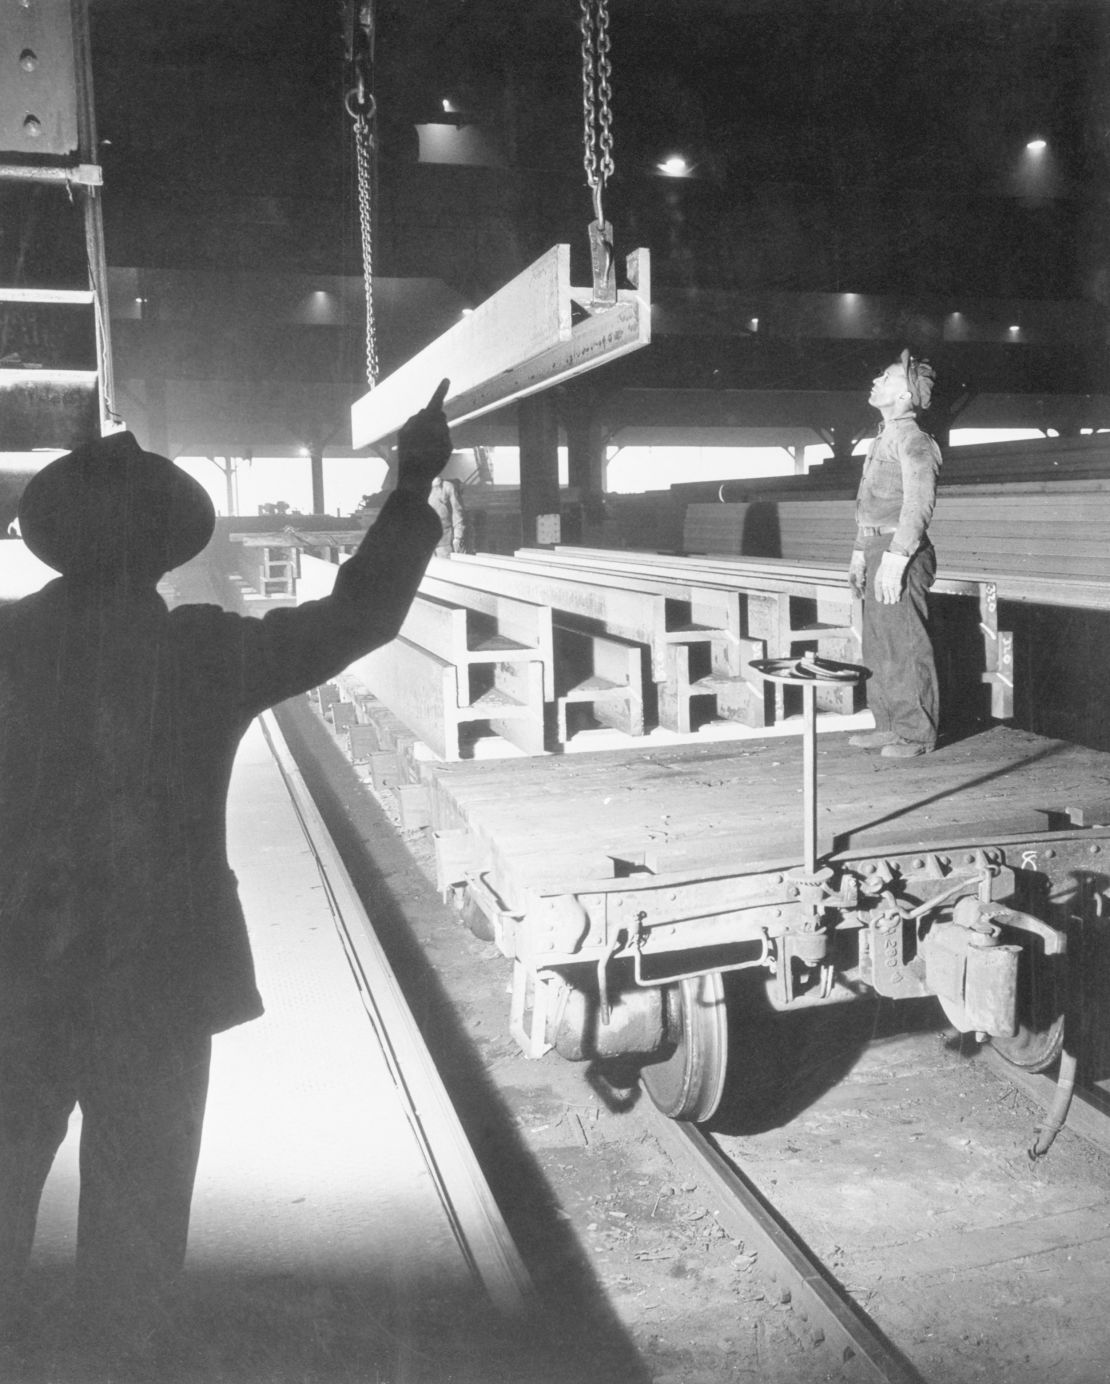 The first steel beams for the 29-story United Nations Secretariat Building are loaded at the Homestead Works of U.S. Steel. Products from US Steel's mills were key components of many iconic buildings, bridges and other structures during the last century, including what was then known as the Sears Tower in Chicago, then the world's tallest building, the Vehicle Assembly Building at NASA’s Kennedy Space Station in Florida, the Tappan Zee, Verrazano Narrows and Henry Hudson bridges in New York City and the New Orleans Superdome.